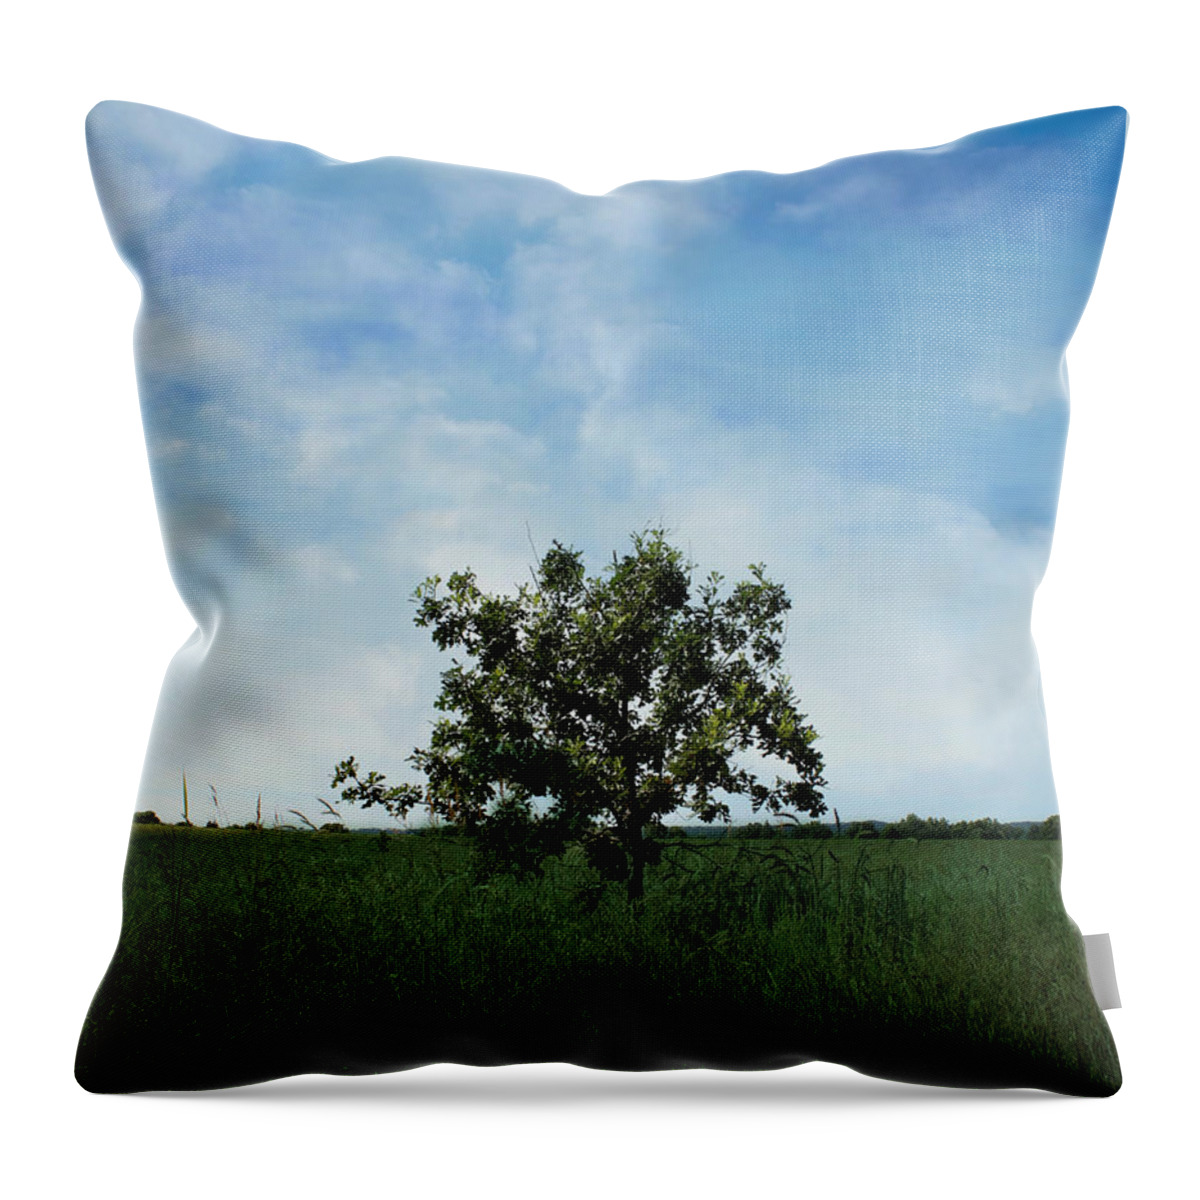 Simplicity Throw Pillow featuring the photograph Solitude by Inspired Arts